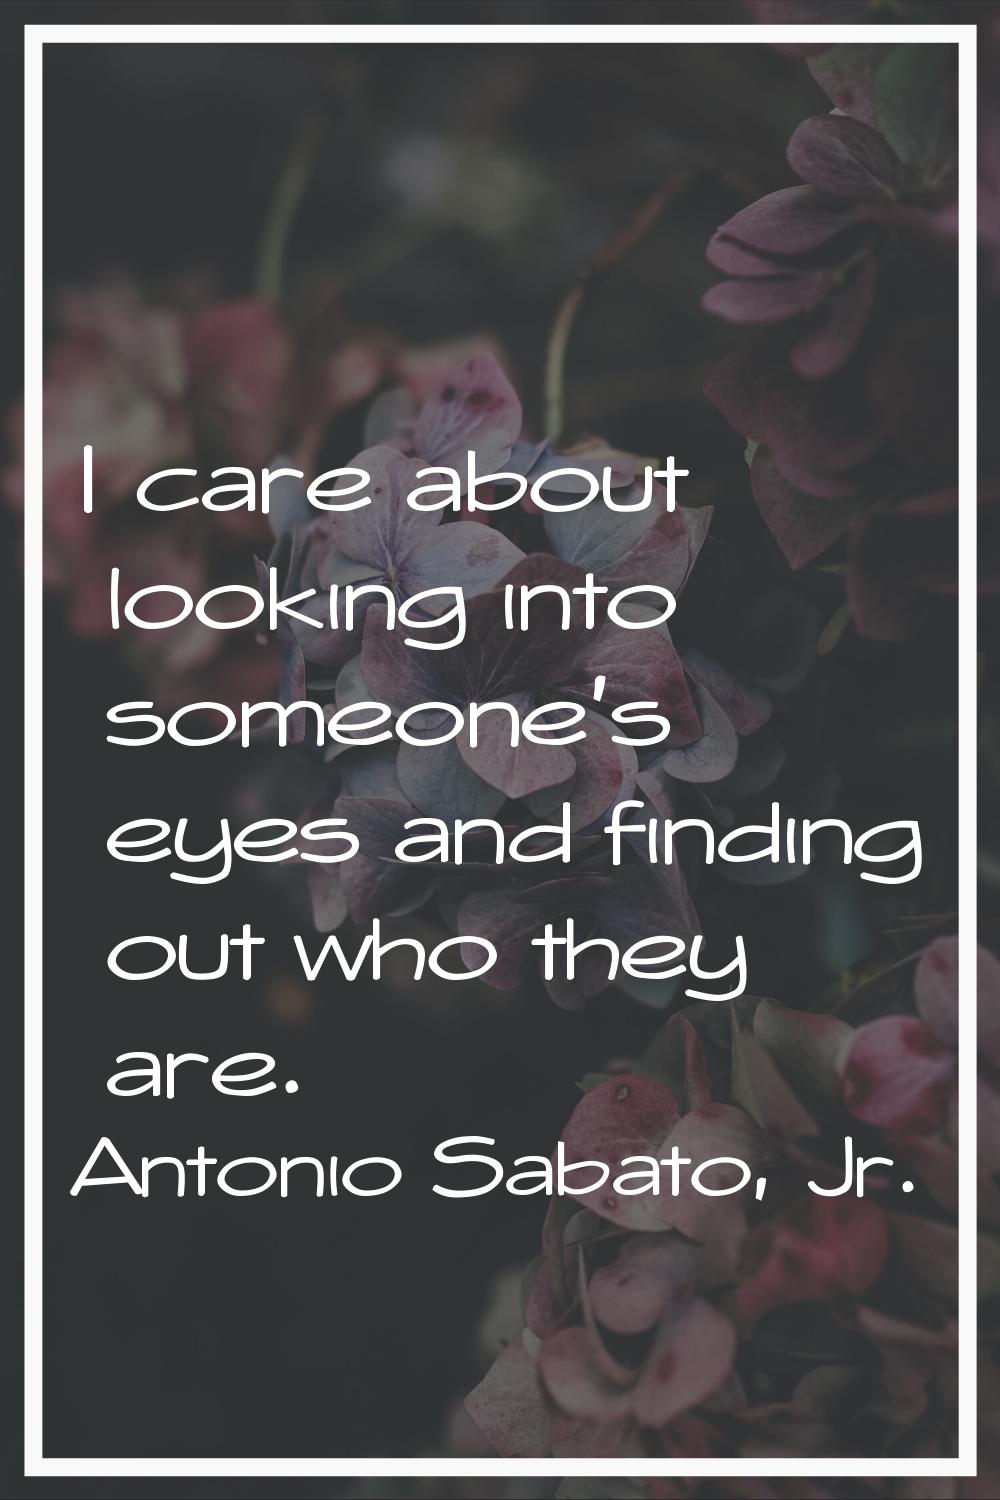 I care about looking into someone's eyes and finding out who they are.